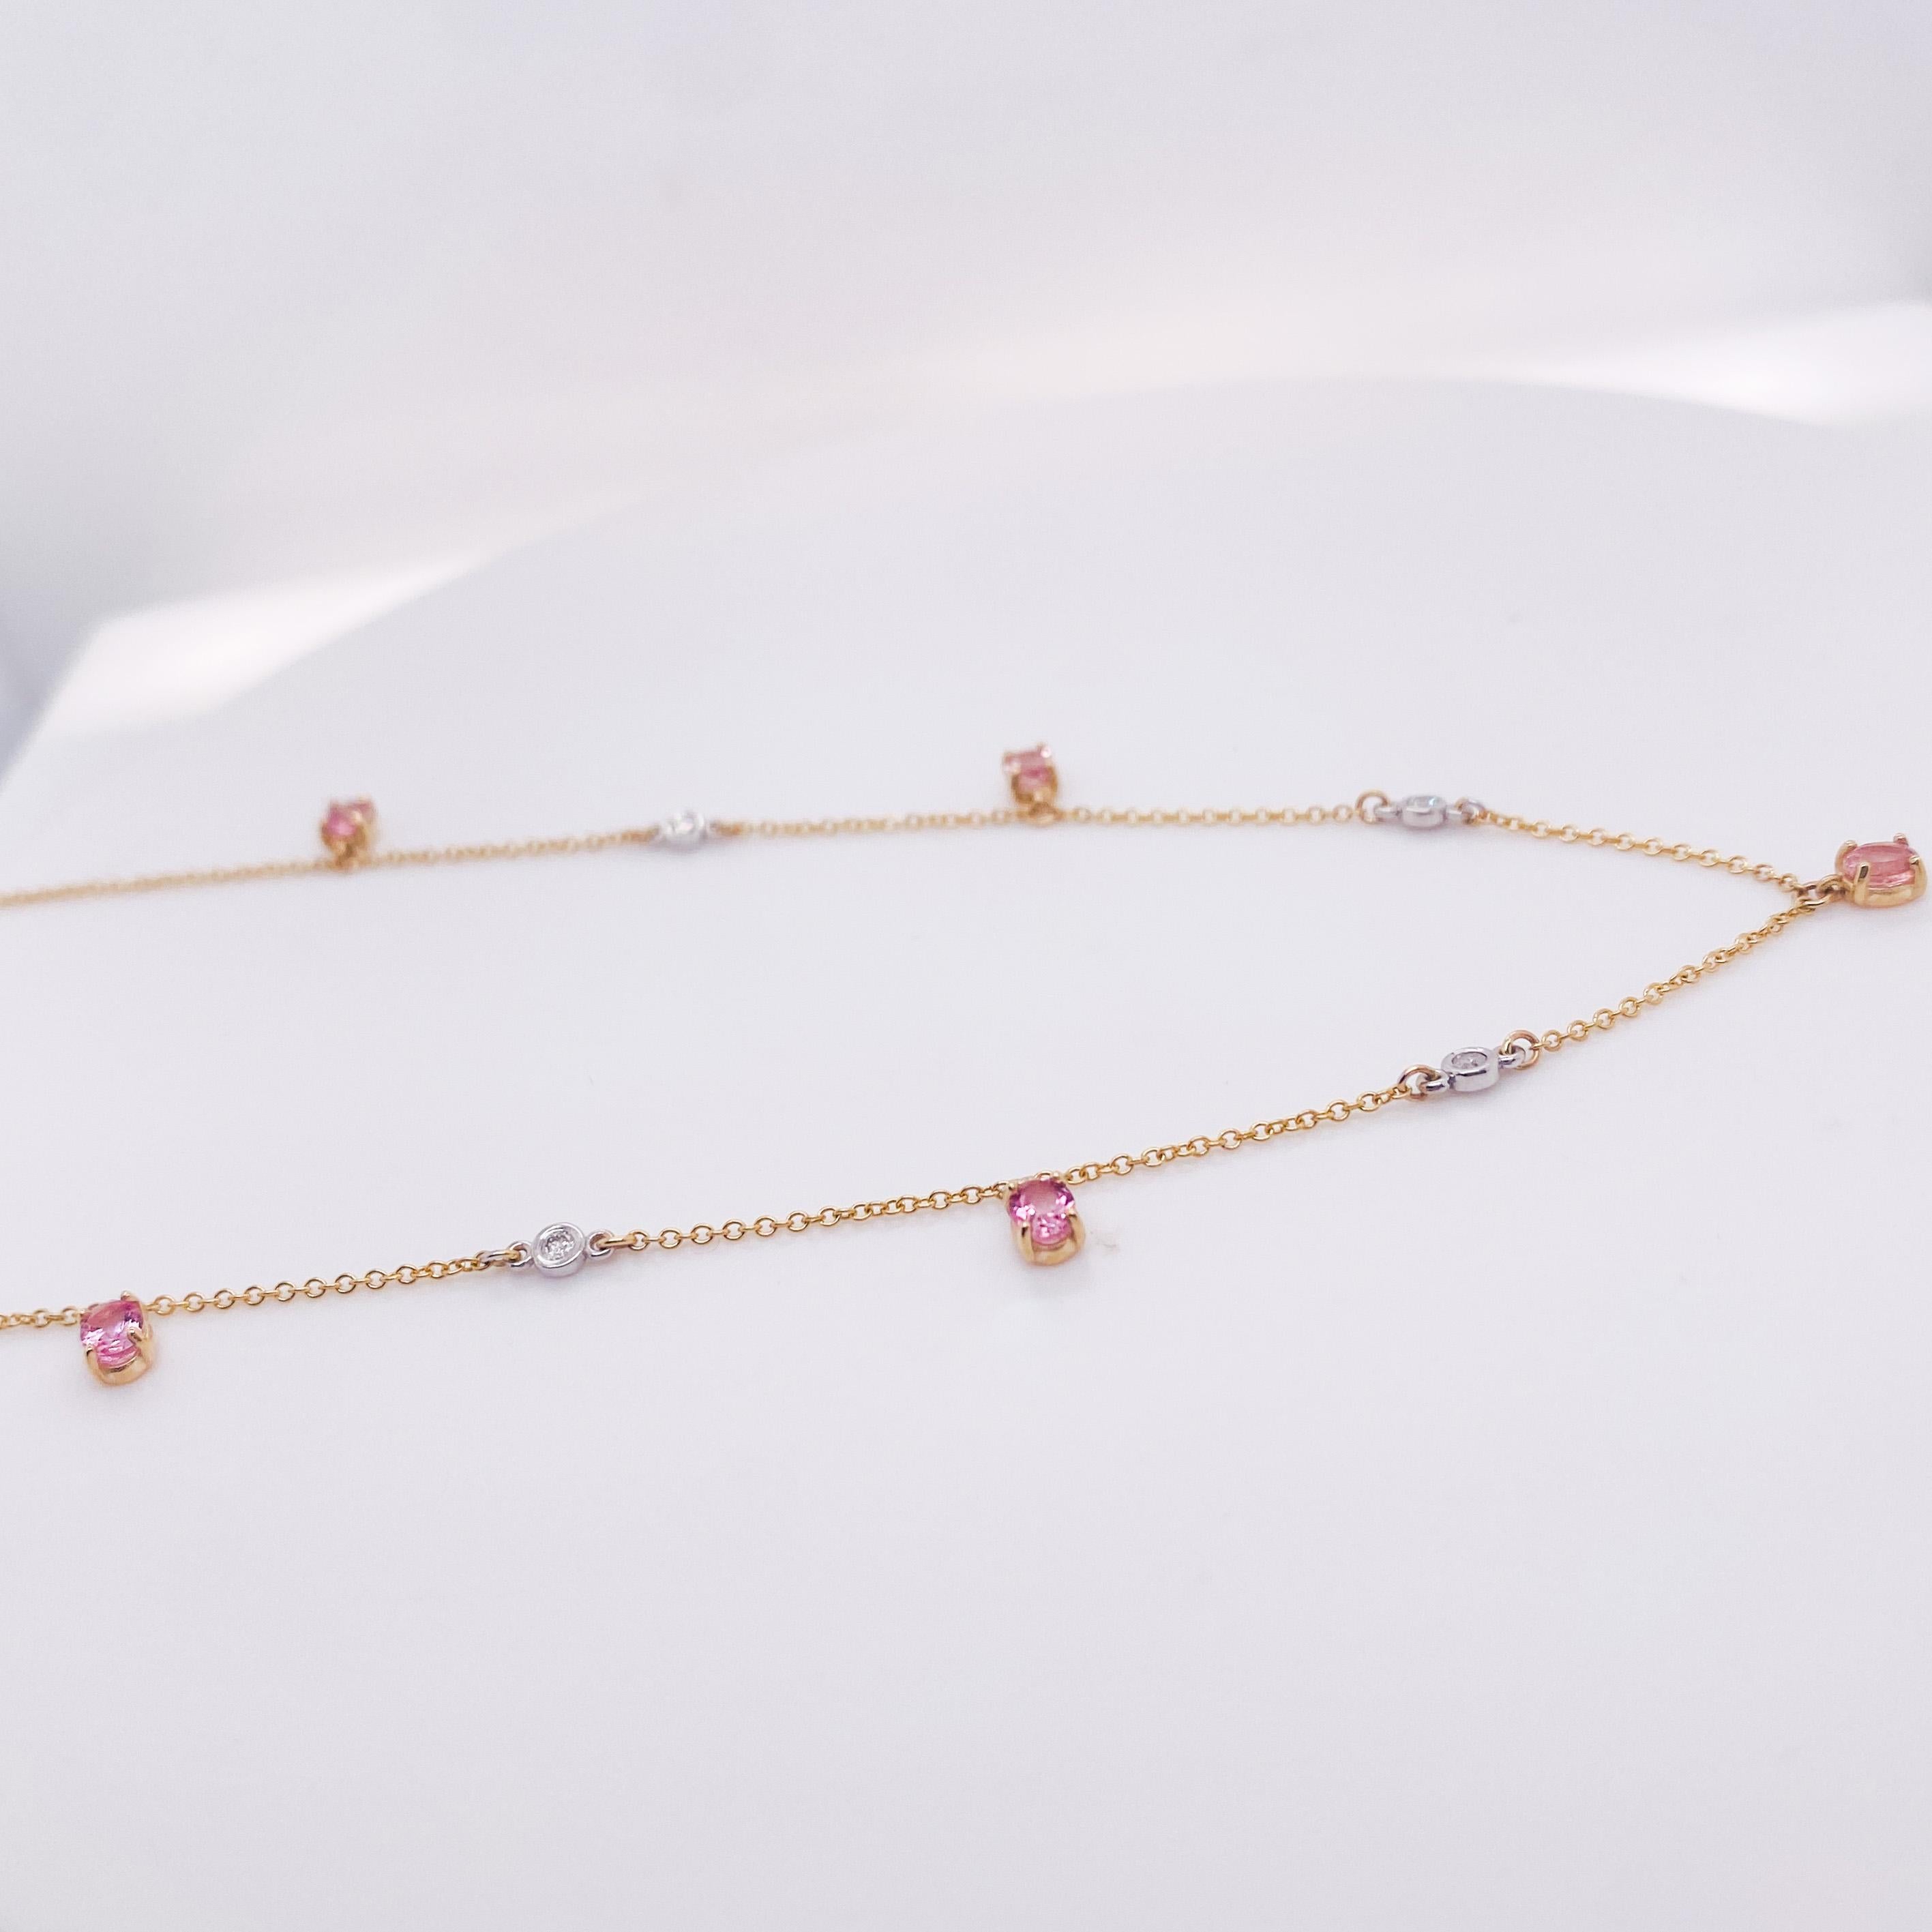 Oval Cut Delightful Pink Tourmaline & Diamond Station Necklace 1.15 Carats in 14k Gold LV For Sale